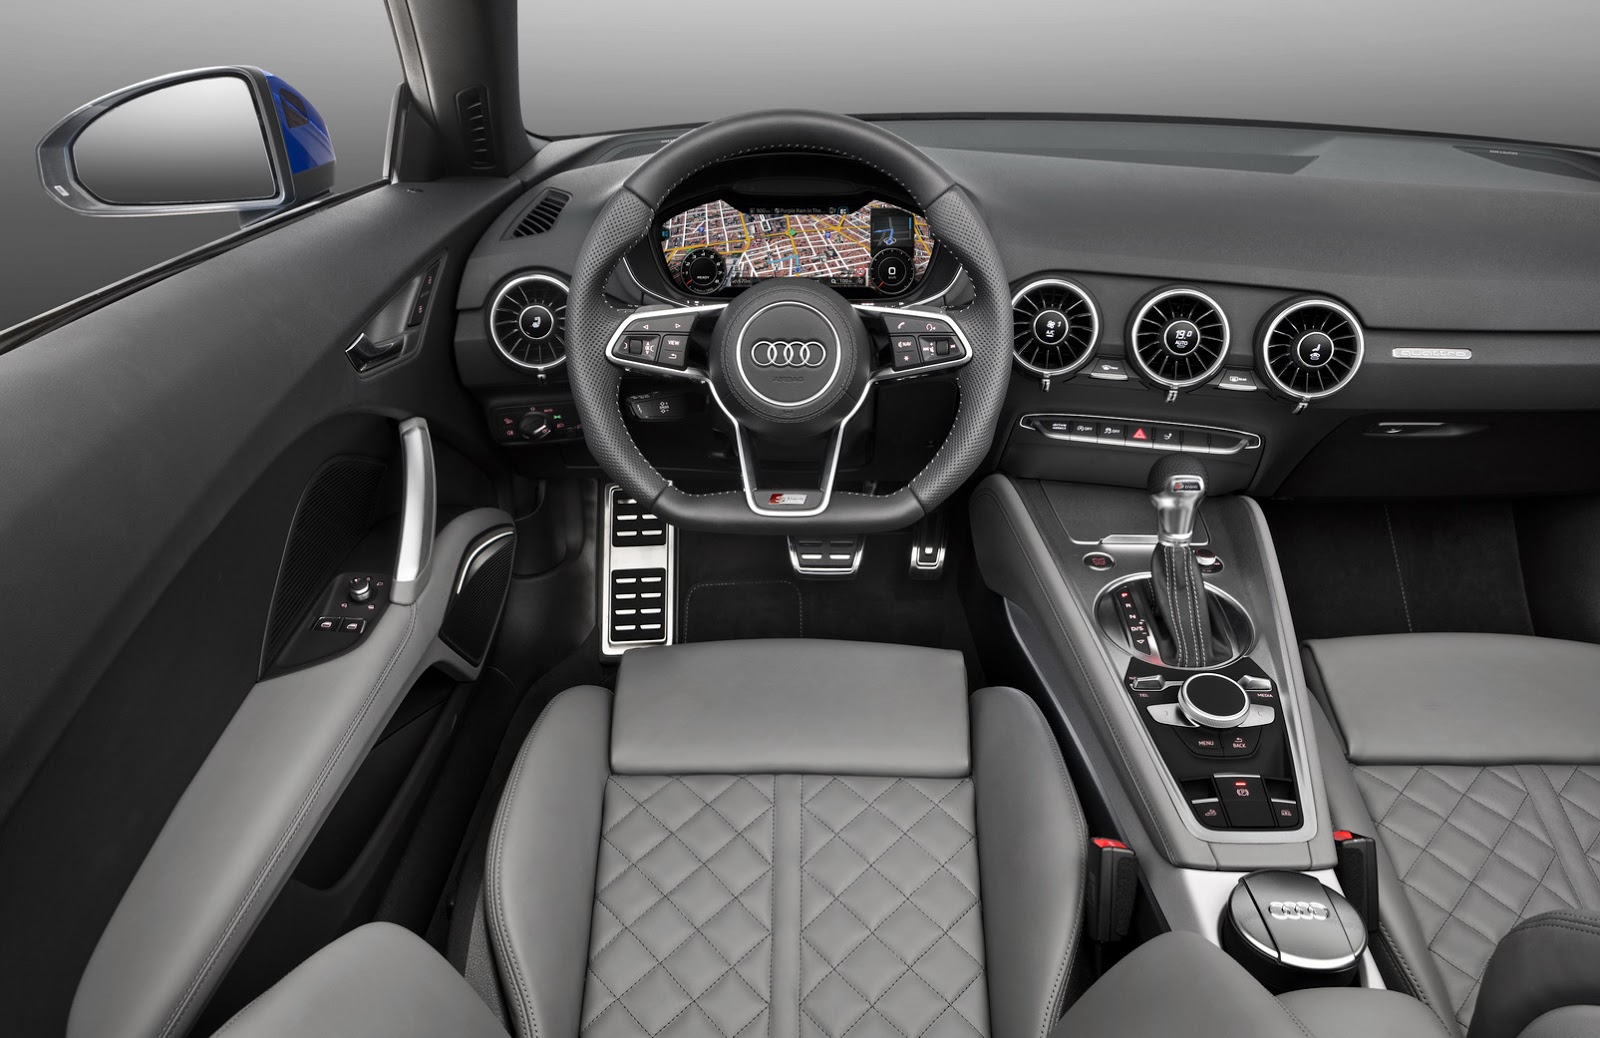 2015 Audi TT and TTS Roadster Revealed: Convertible in 10 Seconds